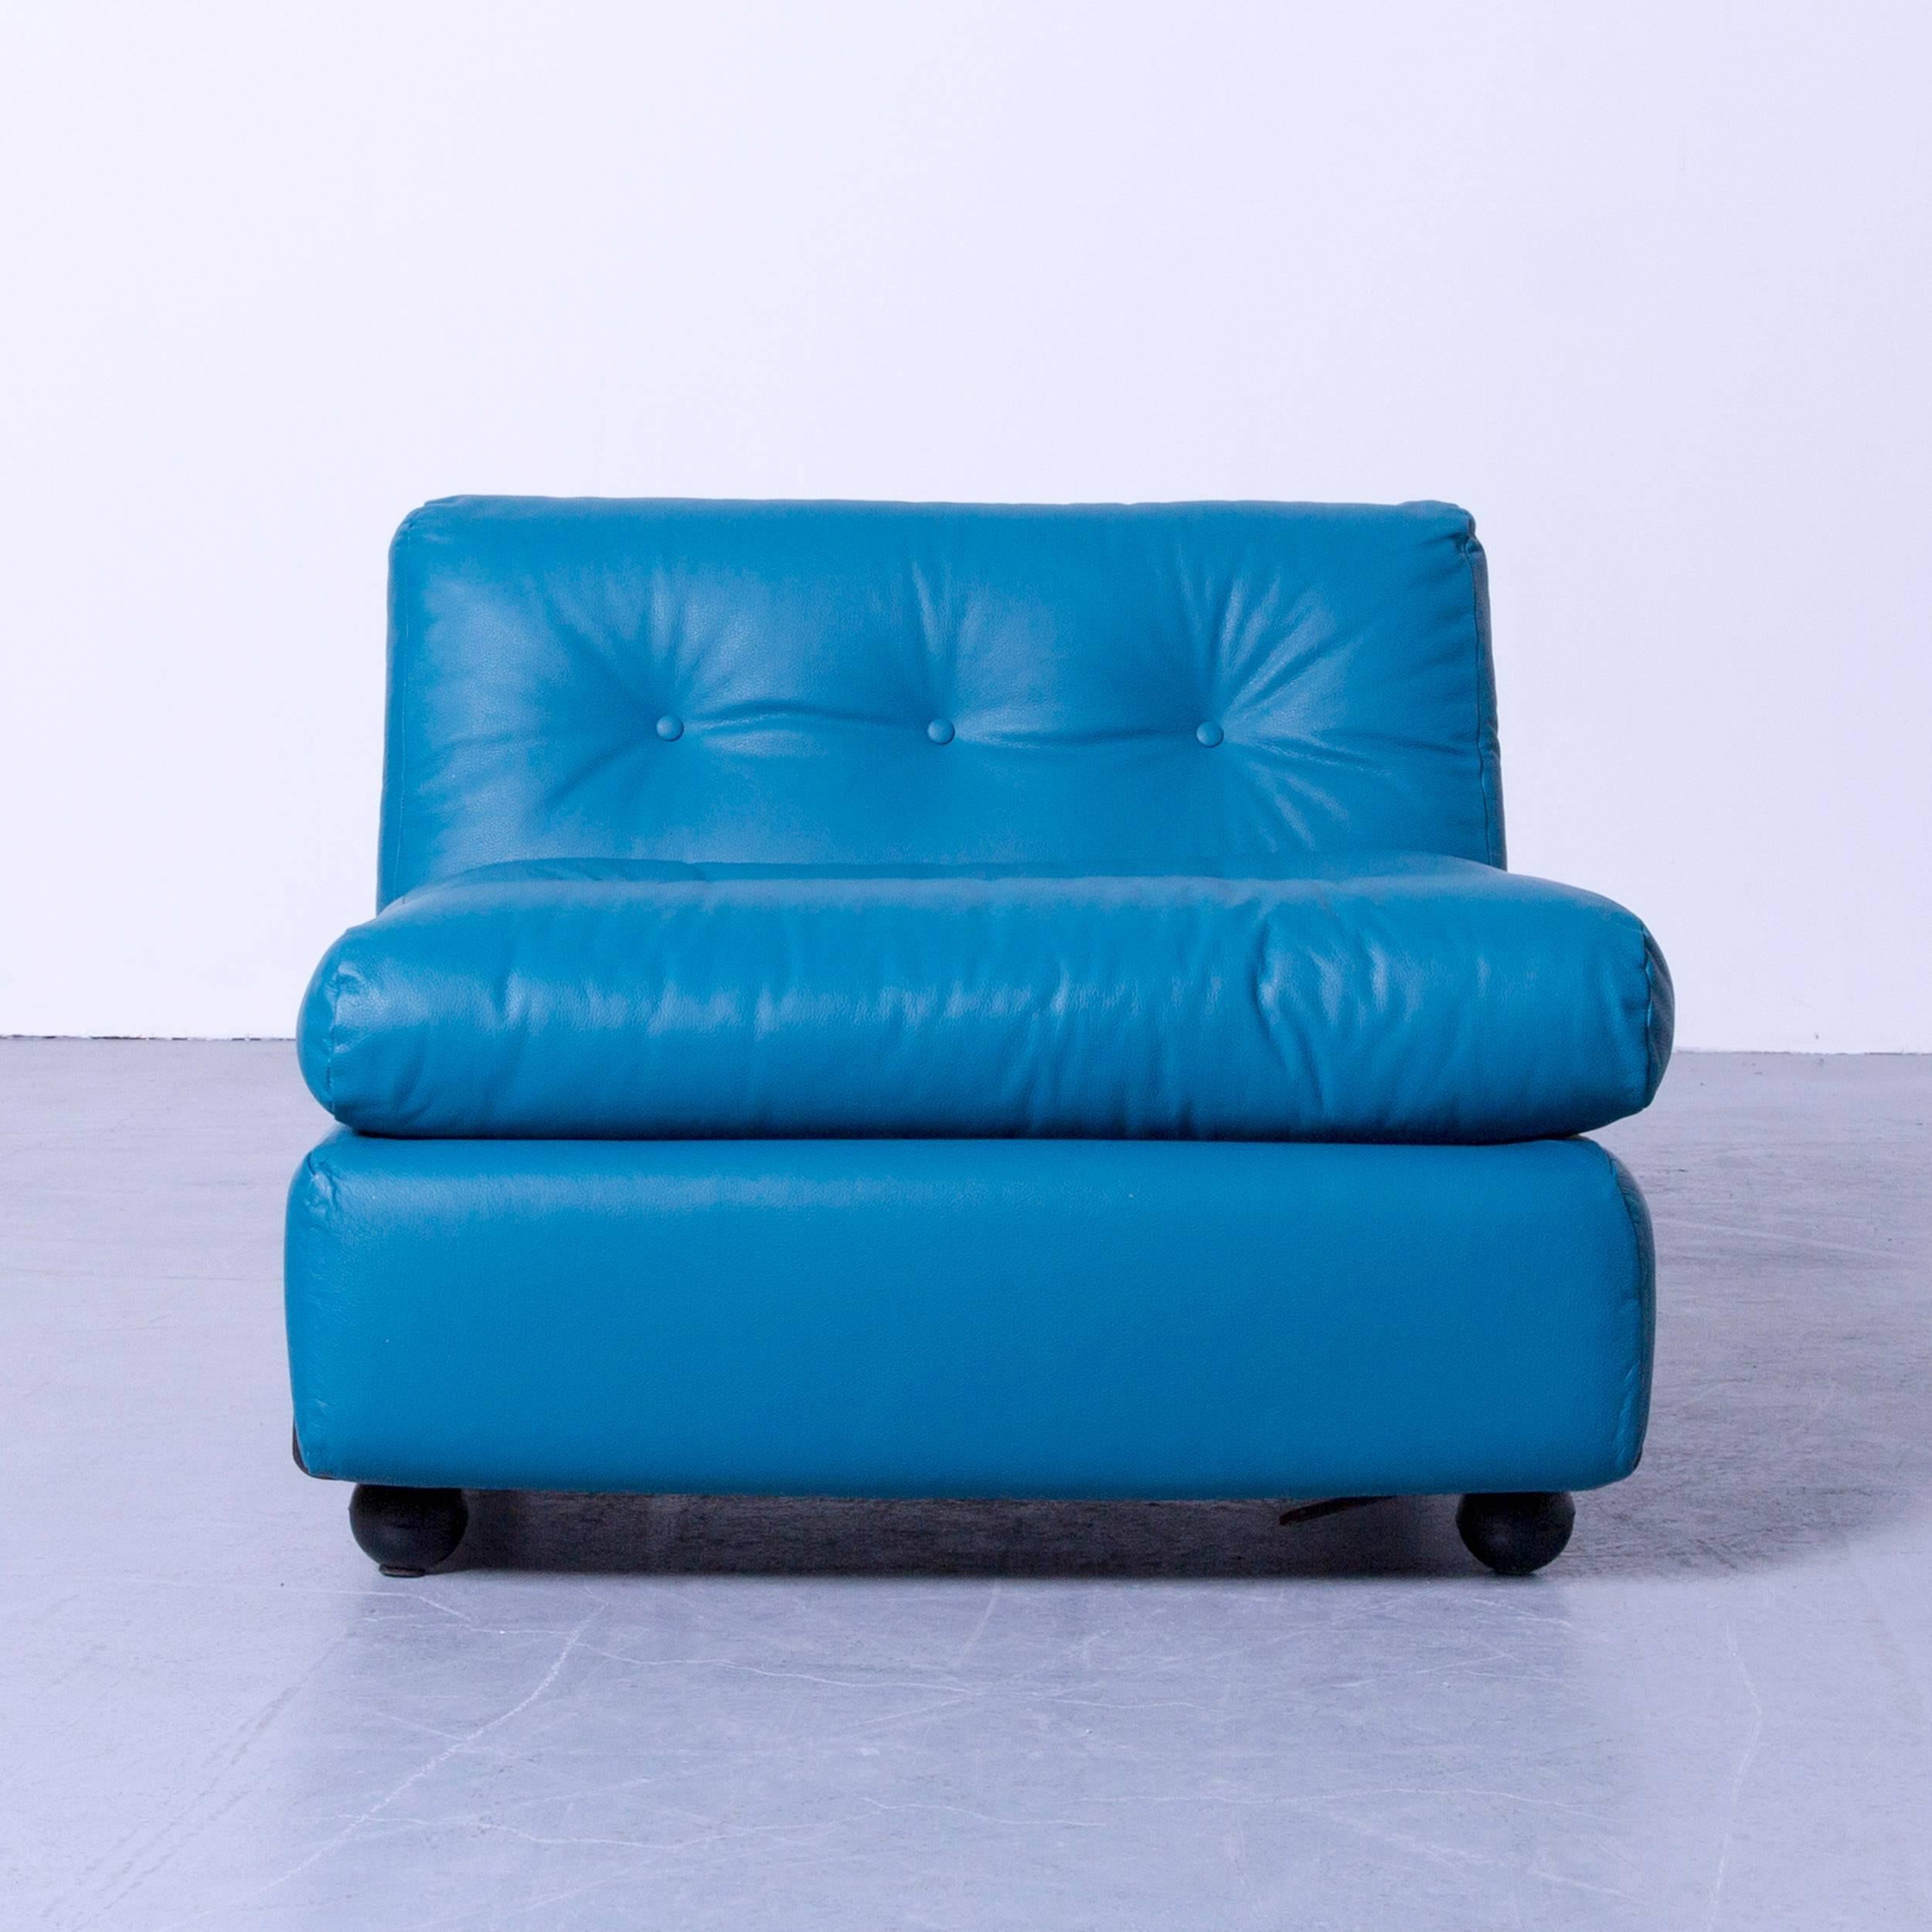 B&B Italia Amanta designer lounge chair by Mario Bellini turquoise, in a minimalistic and modern design, made for pure comfort.